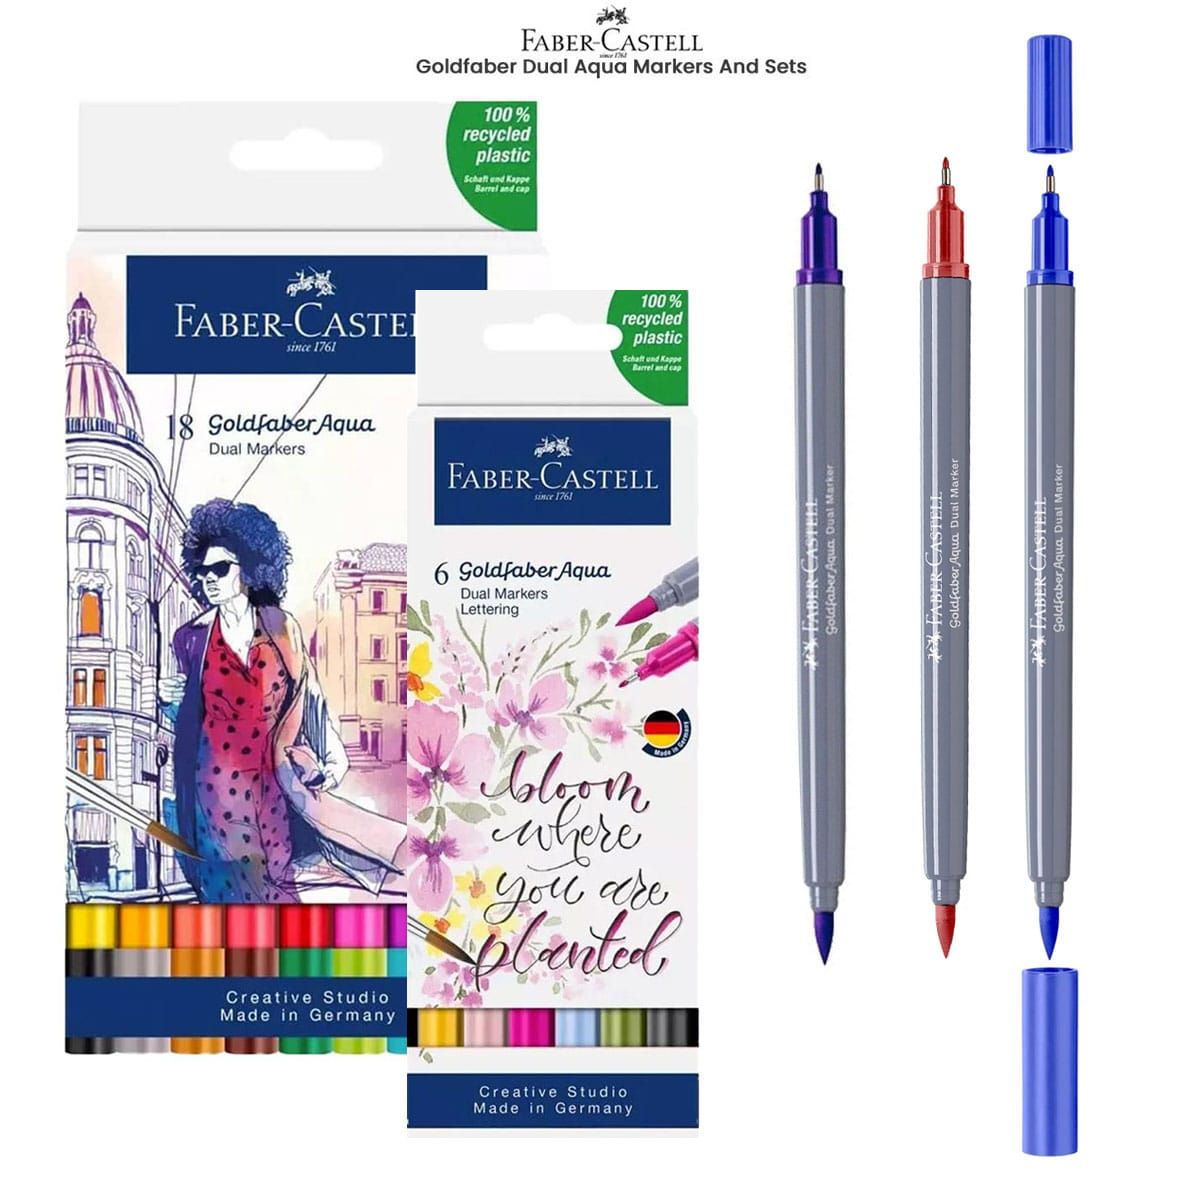 Faber-Castell Red Label DuoTip Washable Marker Set of 12 - Wet Paint  Artists' Materials and Framing